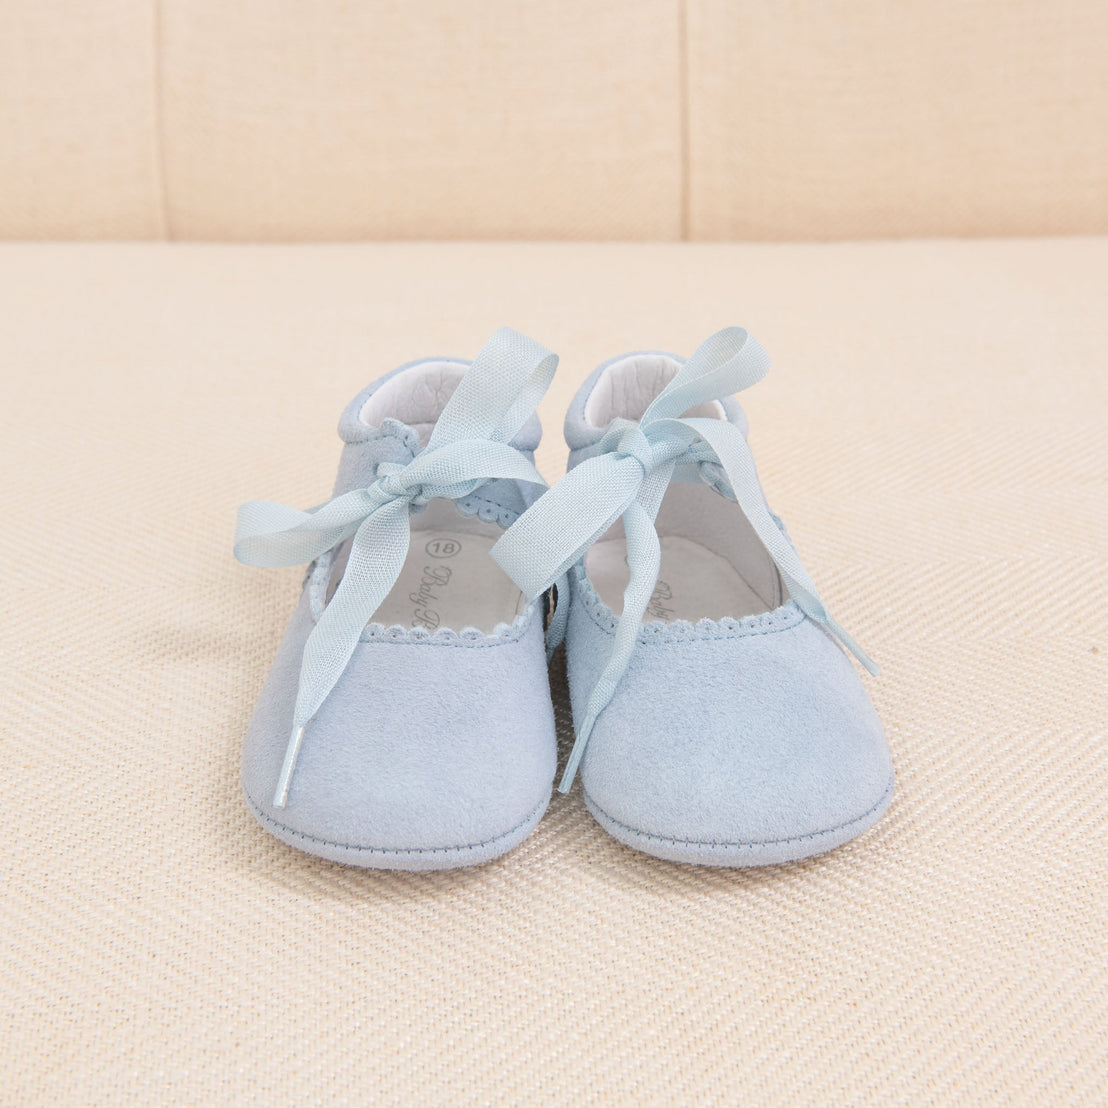 A pair of baby's Thea Suede Tie Mary Janes in light blue with ribbon ties on a beige fabric background. These heirloom-quality shoes feature delicate stitching and soft suede fabric.